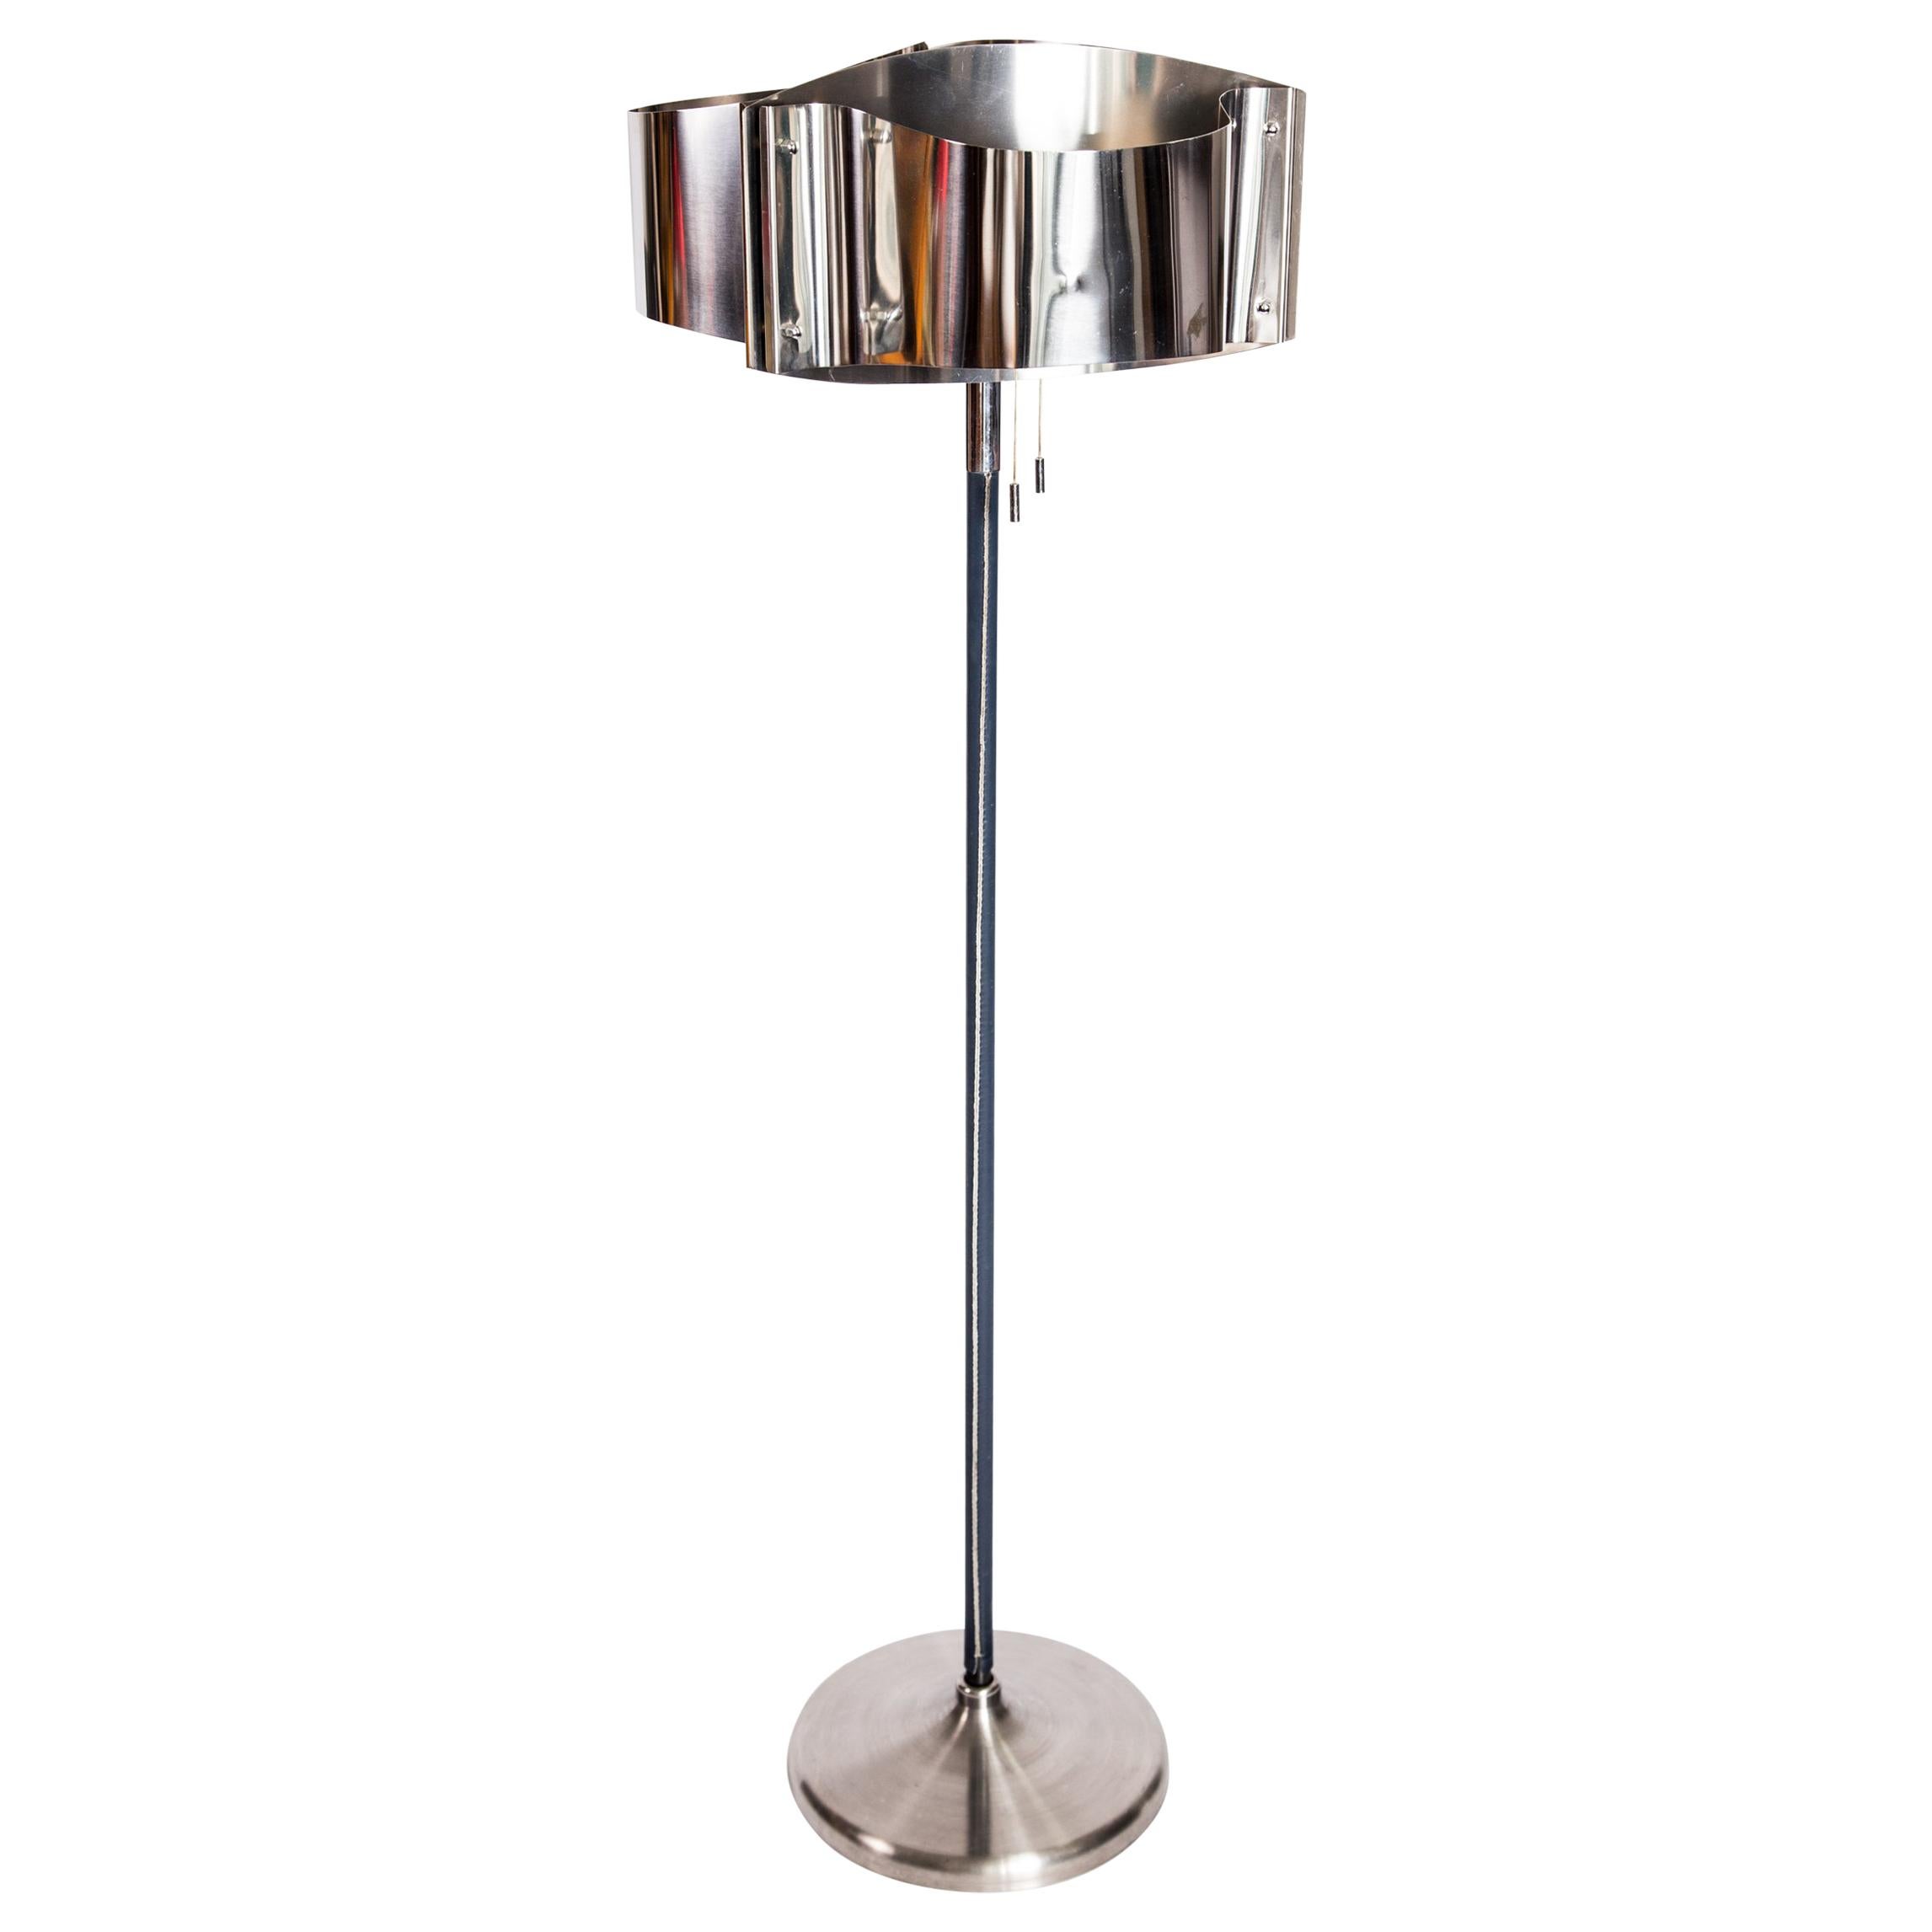 Chrome-Plated Floor Lamp with Leather Accents, 1970s For Sale